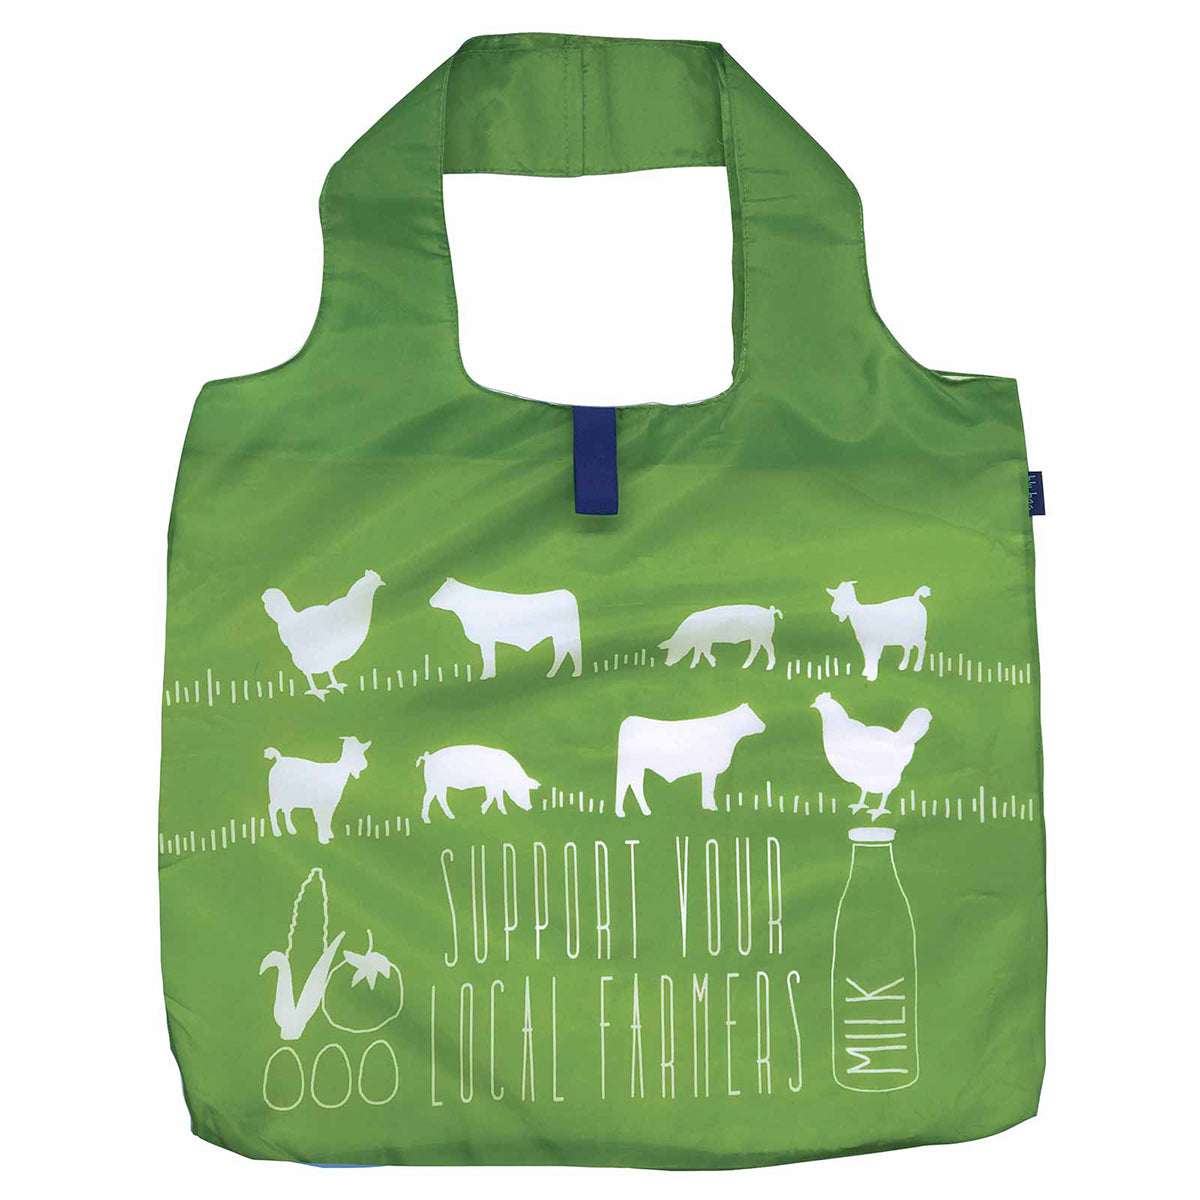 Reusable BLU BAG LOCAL FARMER tote bag featuring white silhouettes of farm animals and a message saying &quot;support your local farmers&quot; along with a milk bottle graphic, perfect as an eco-friendly shopping bag by Rockflowerpaper.